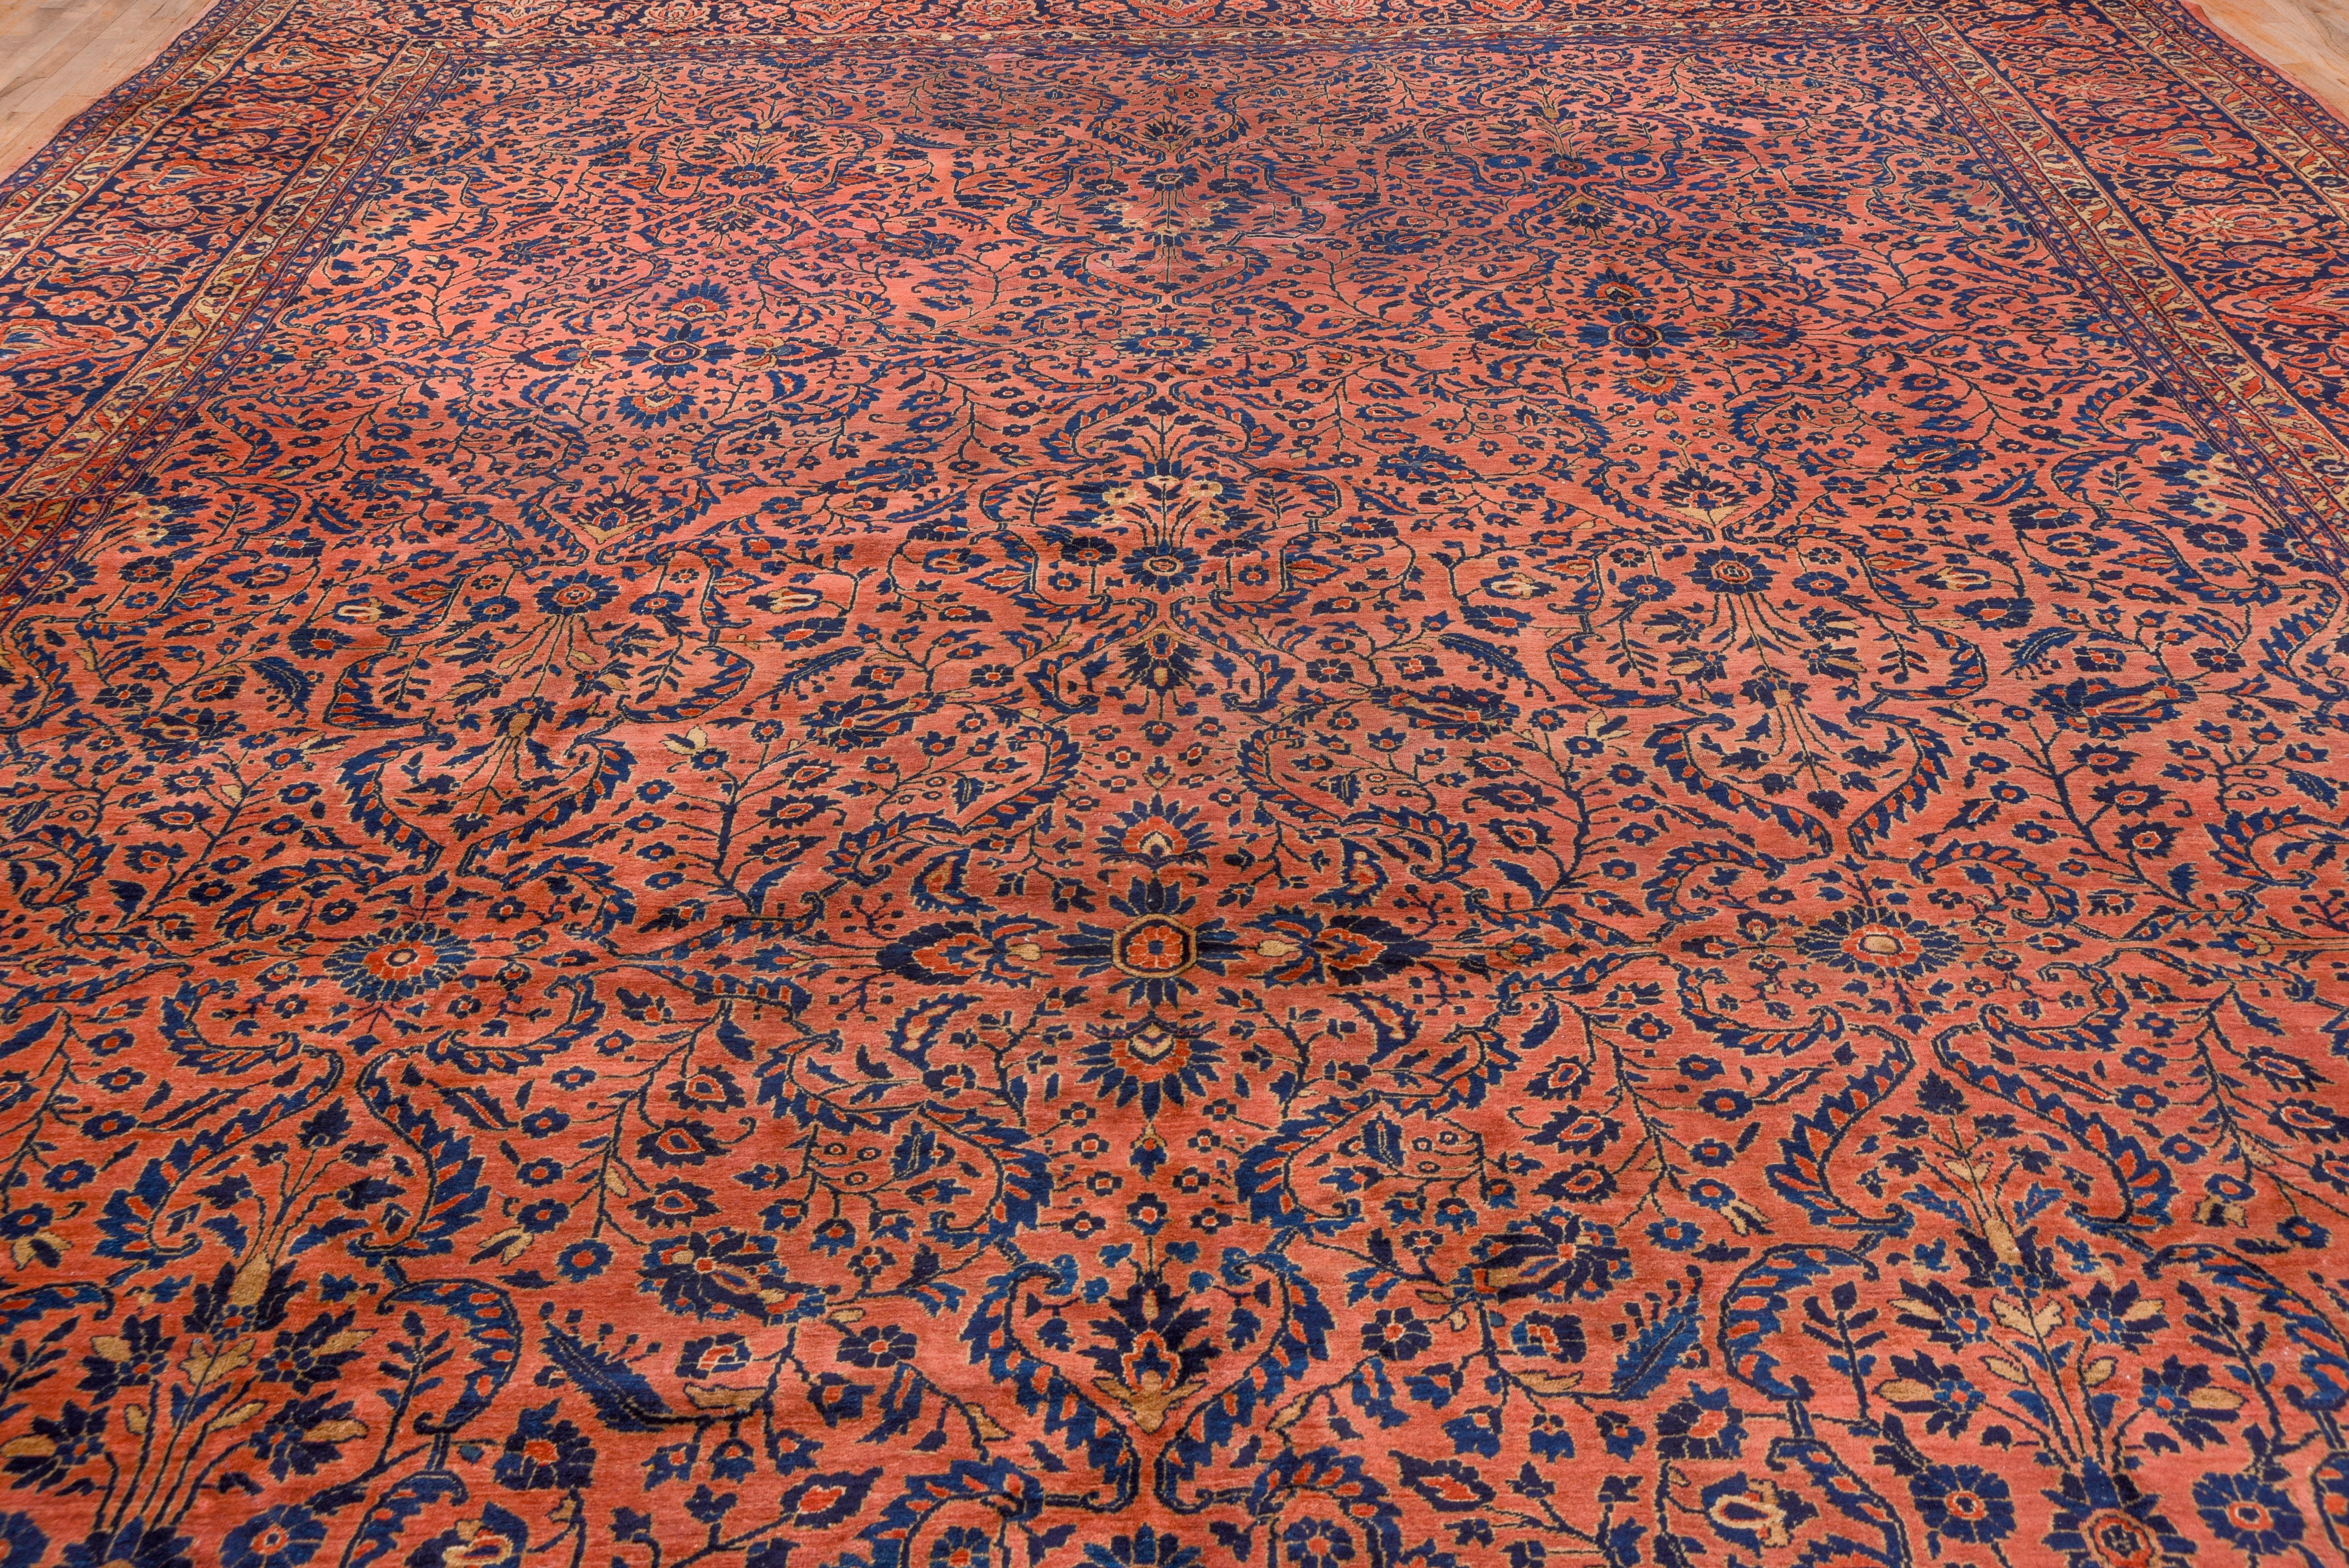 Wool Antique Persian Sarouk Gallery Carpet, Orange Allover Field, Mansion Style For Sale